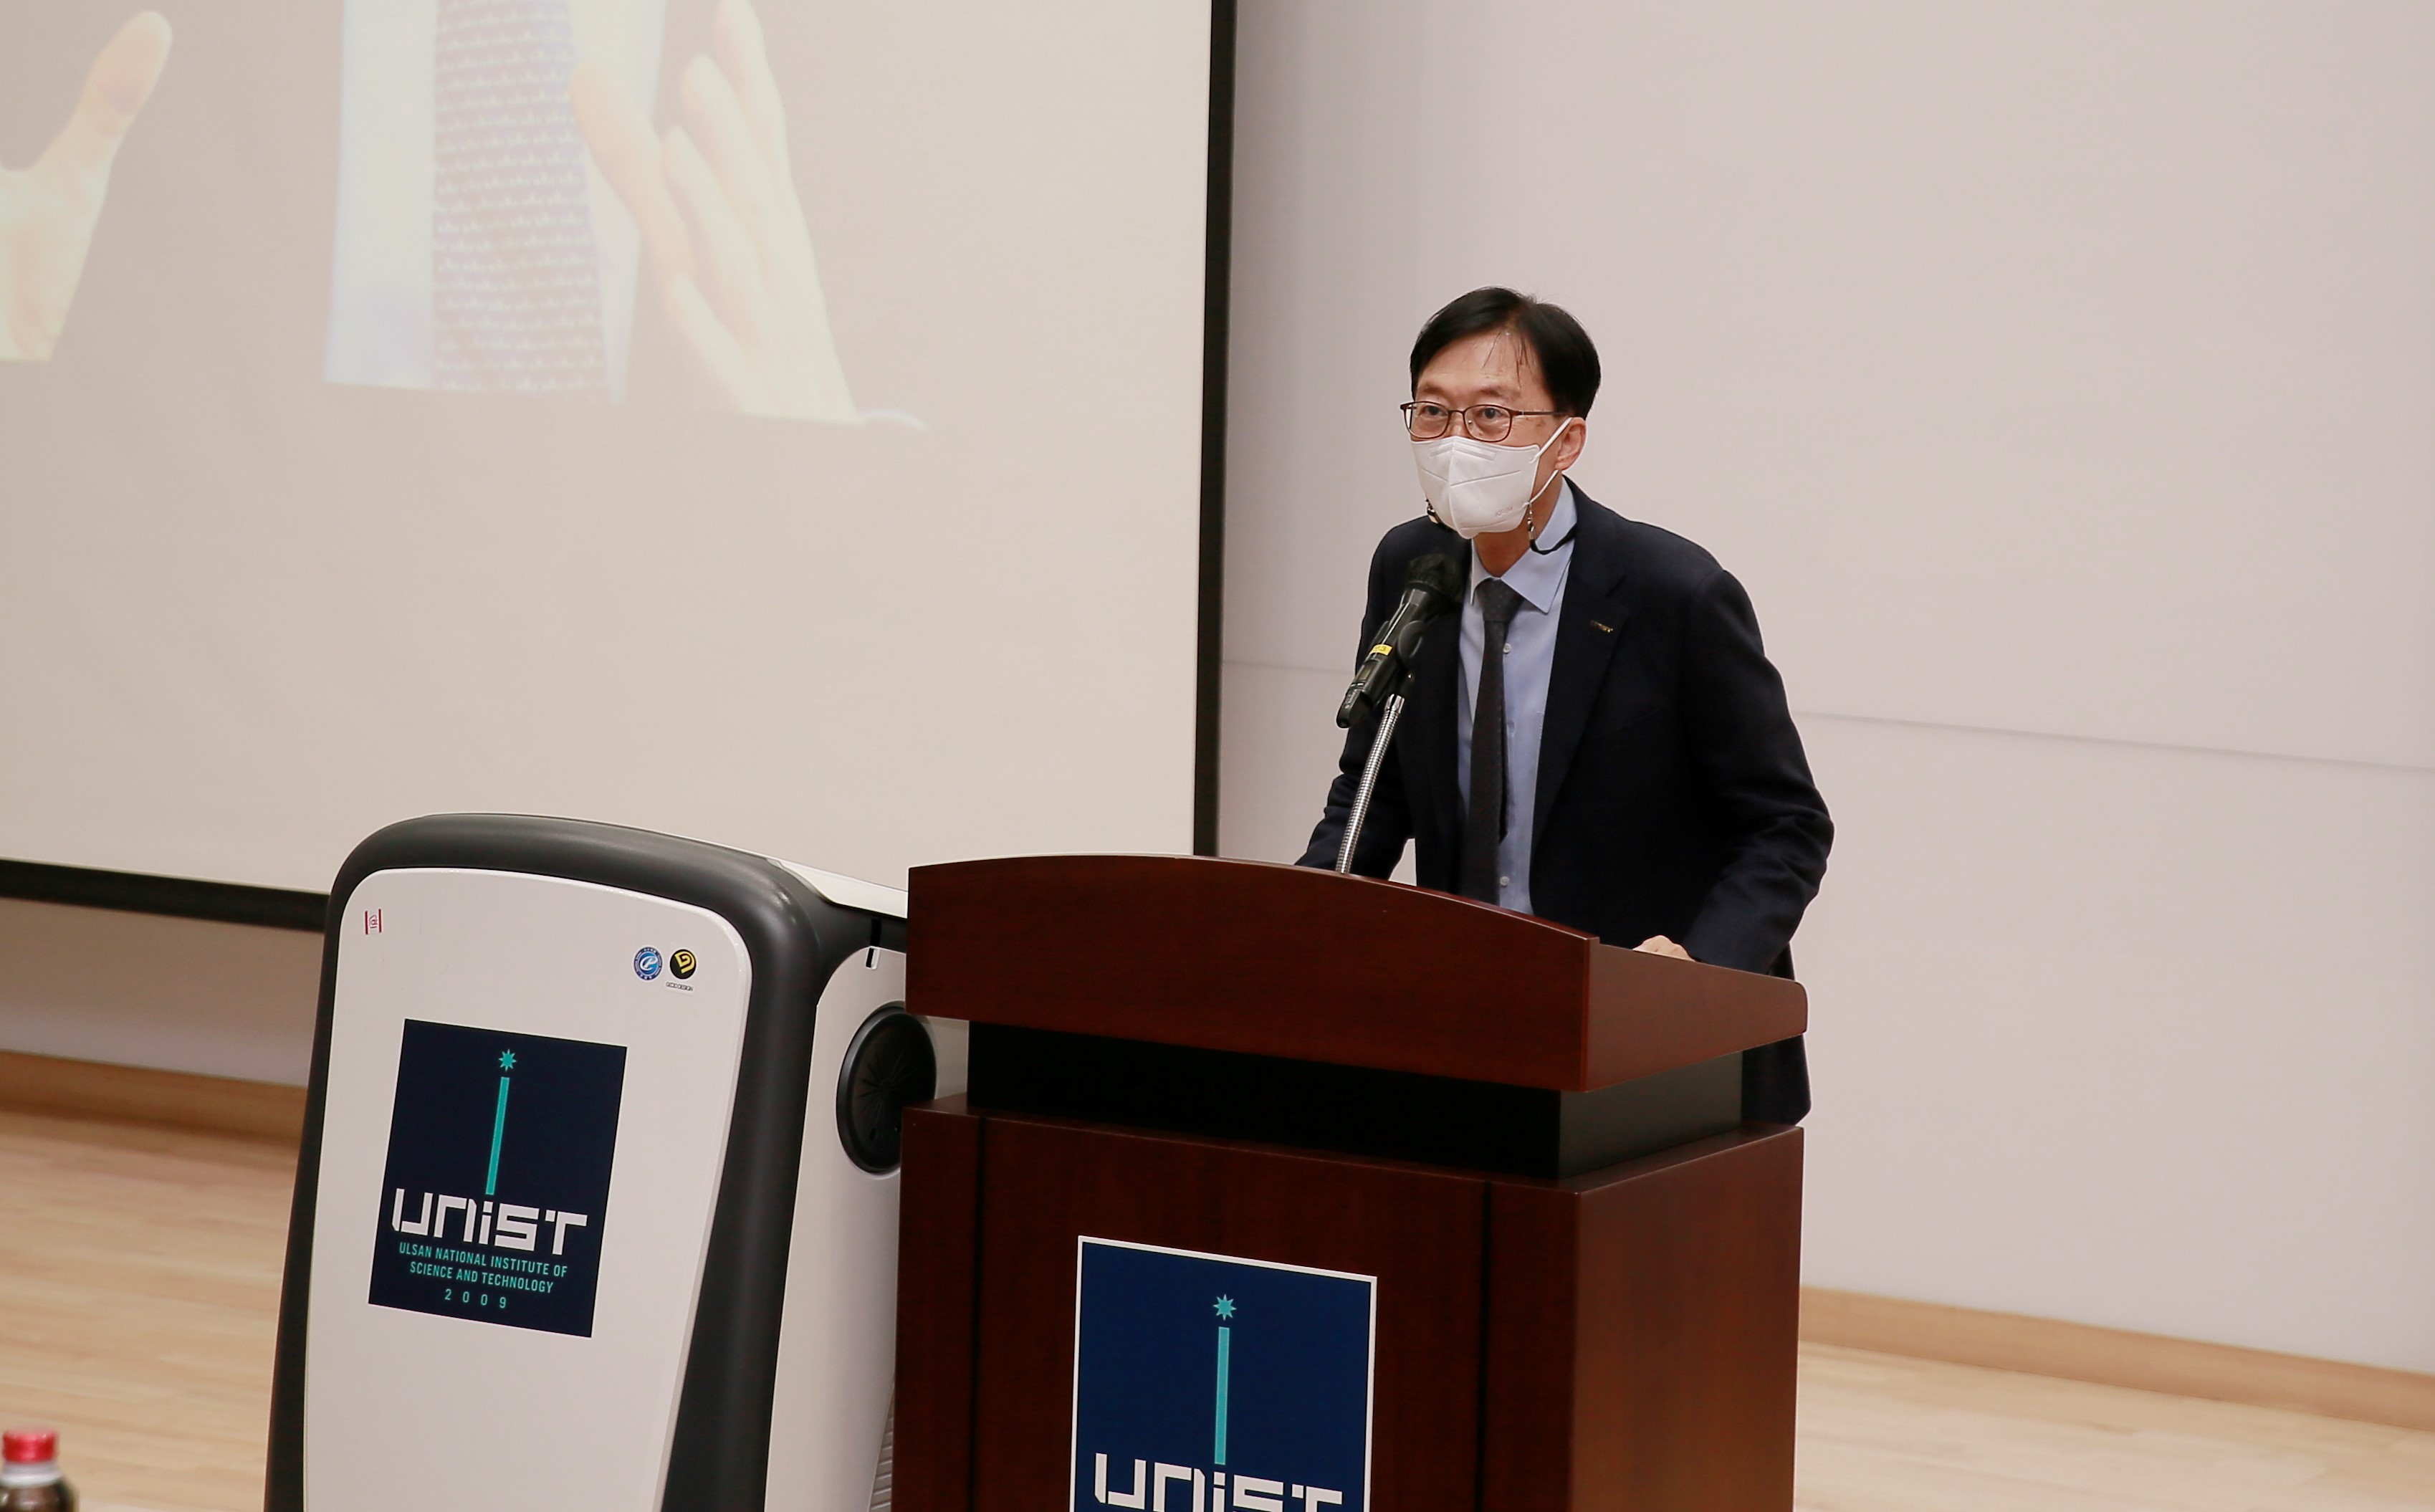 President Yong Hoon Lee, delivering opening remarks at the UNIST AI Innovation Day. 